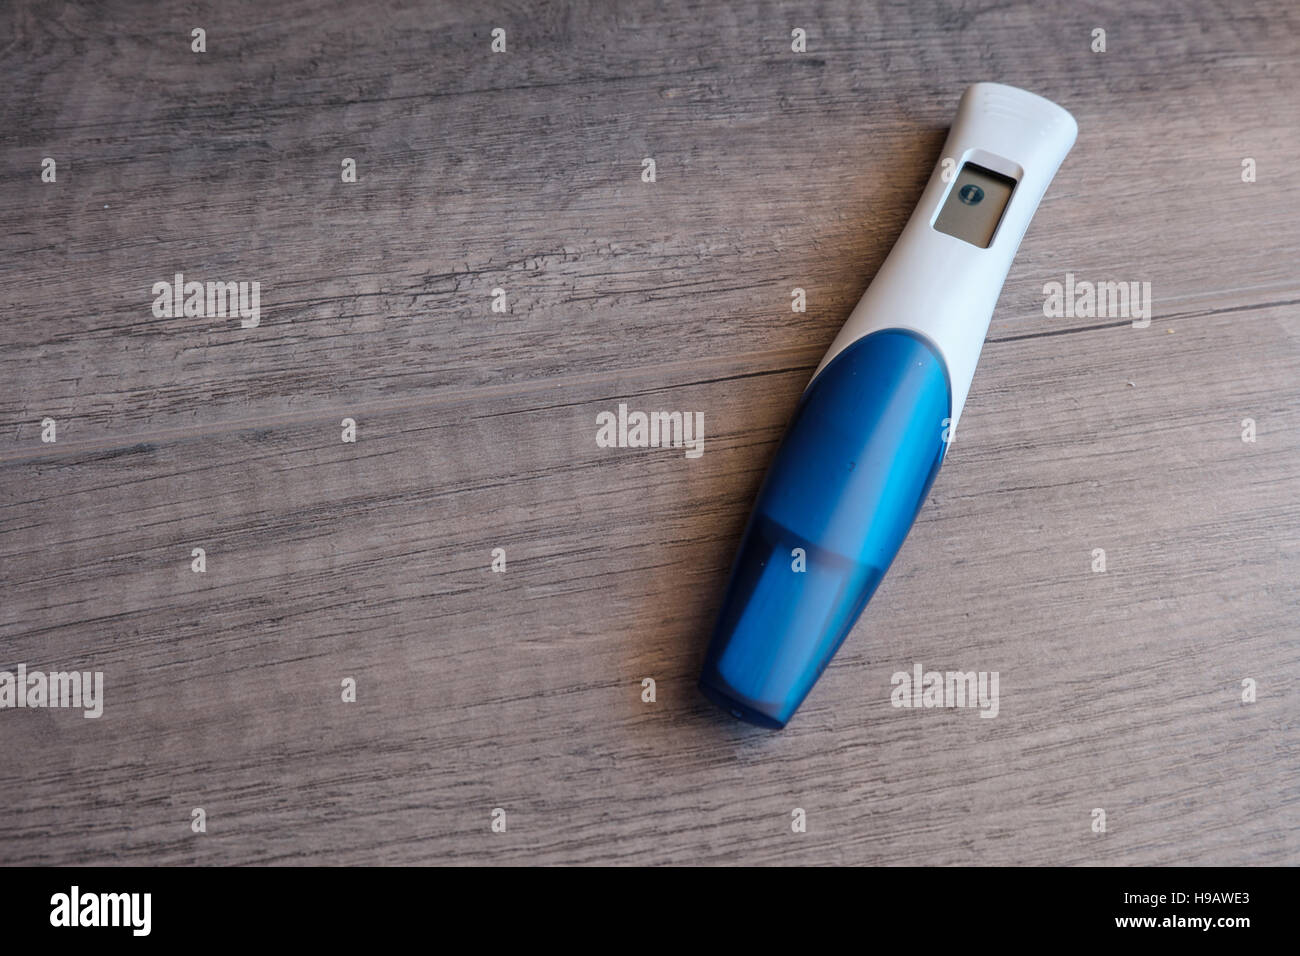 Digital pregnancy test with negative result on wooden background Stock Photo